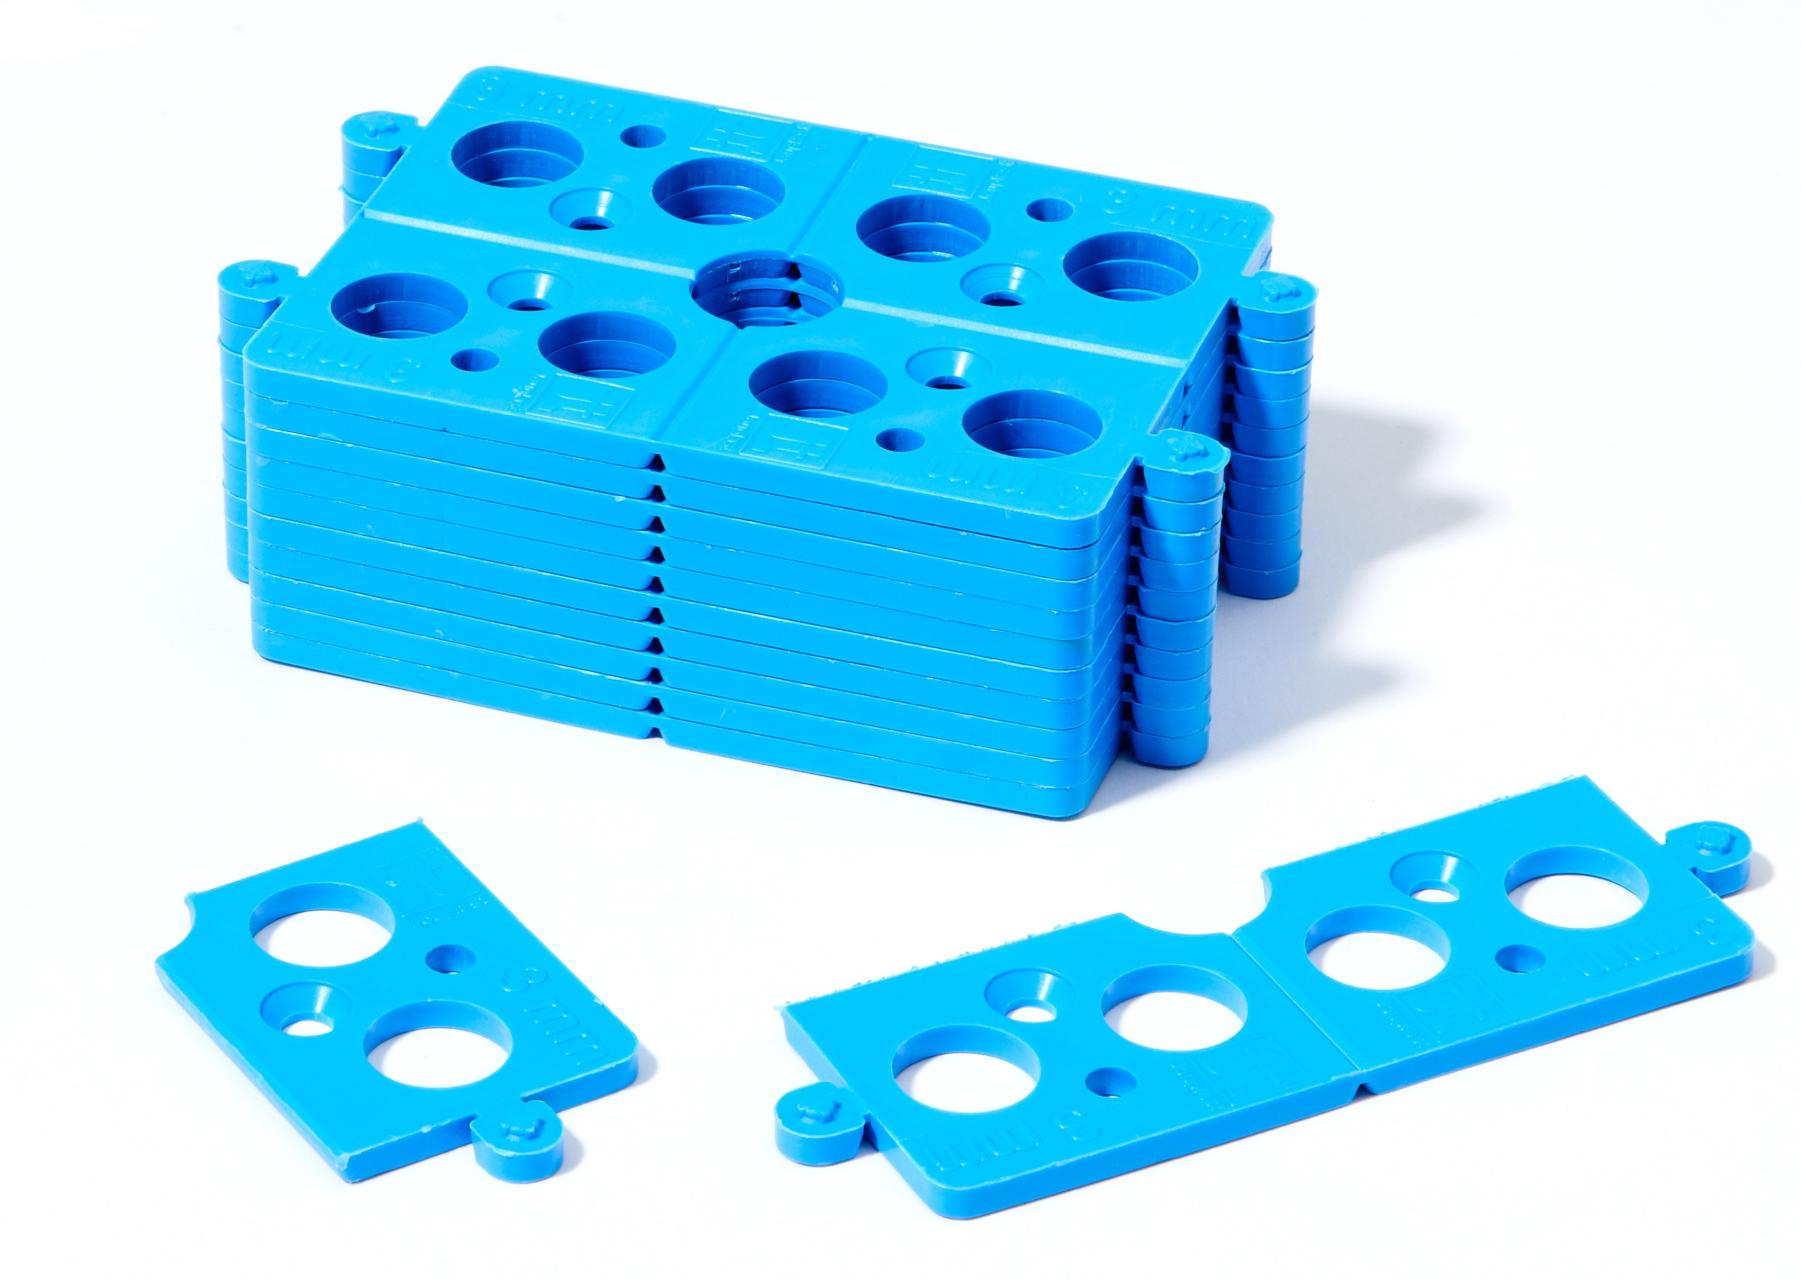 cale-plate-secable-superpos-empilable-3mm-bleu-40-sch-joup-0